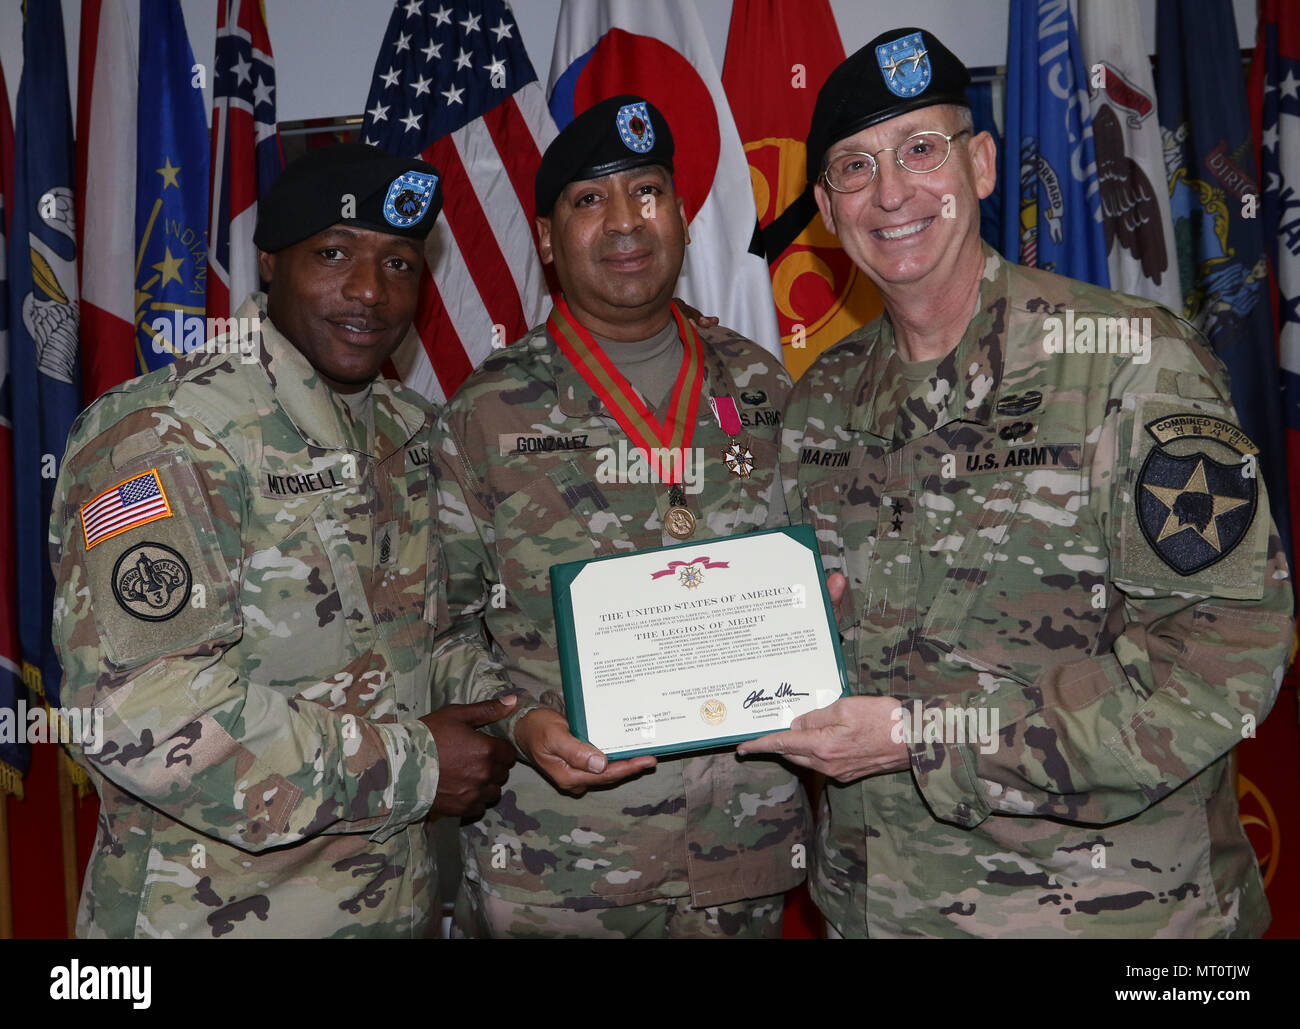 Maj. Gen. Theodore D. Martin, the 2nd Infantry Division/ROK-US Combined Division commander, and Command Sgt. Maj. Edward W. Mitchell, the 2nd Infantry Division/ROK-US Combined Division command sergeant major, presents the United States of American Legion of Merit Award to outgoing 210th Field Artillery Brigade command sergeant major, Command Sgt. Maj. Carlos G. Gonzalez-Pabon, at Carey Gym, Camp Casey, South Korea, July 12, 2017. Gonzalez-Pabon earned the award for his contributions to 210th FA Bde. and 2ID while serving as the brigade command sergeant major from July 2015 to July 2017. (U.S.  Stock Photo